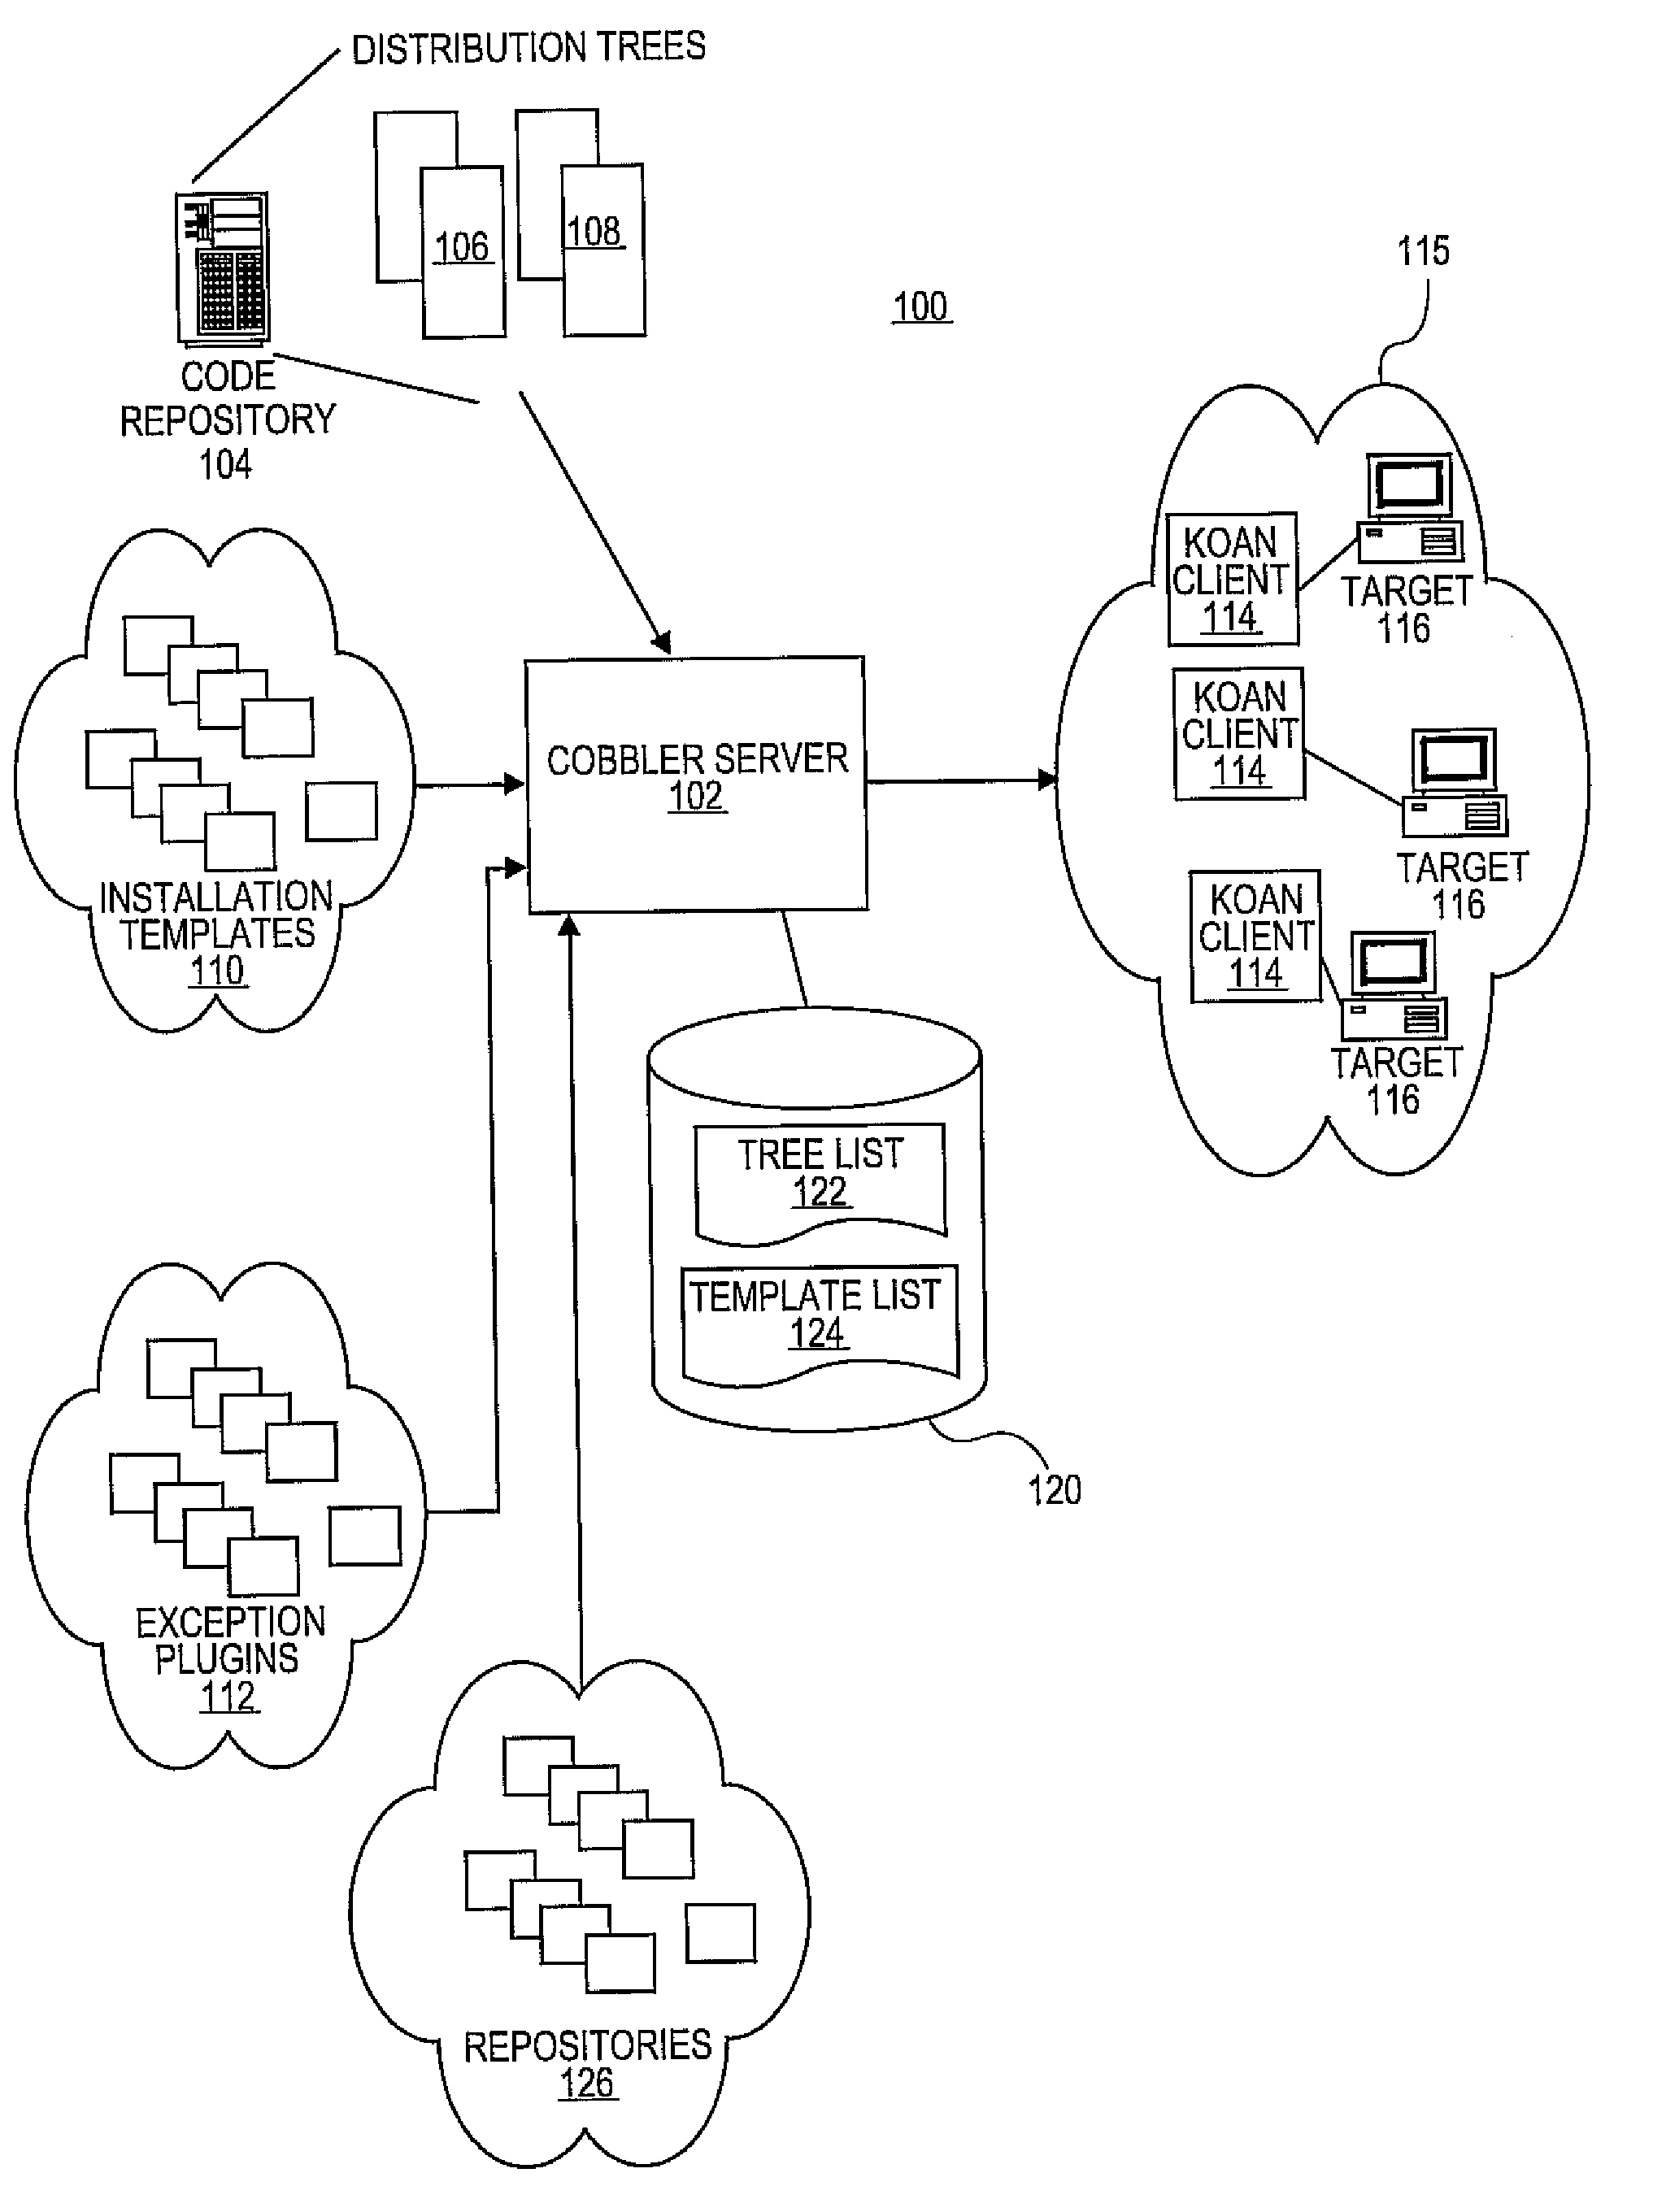 Methods and systems for managing access in a software provisioning environment